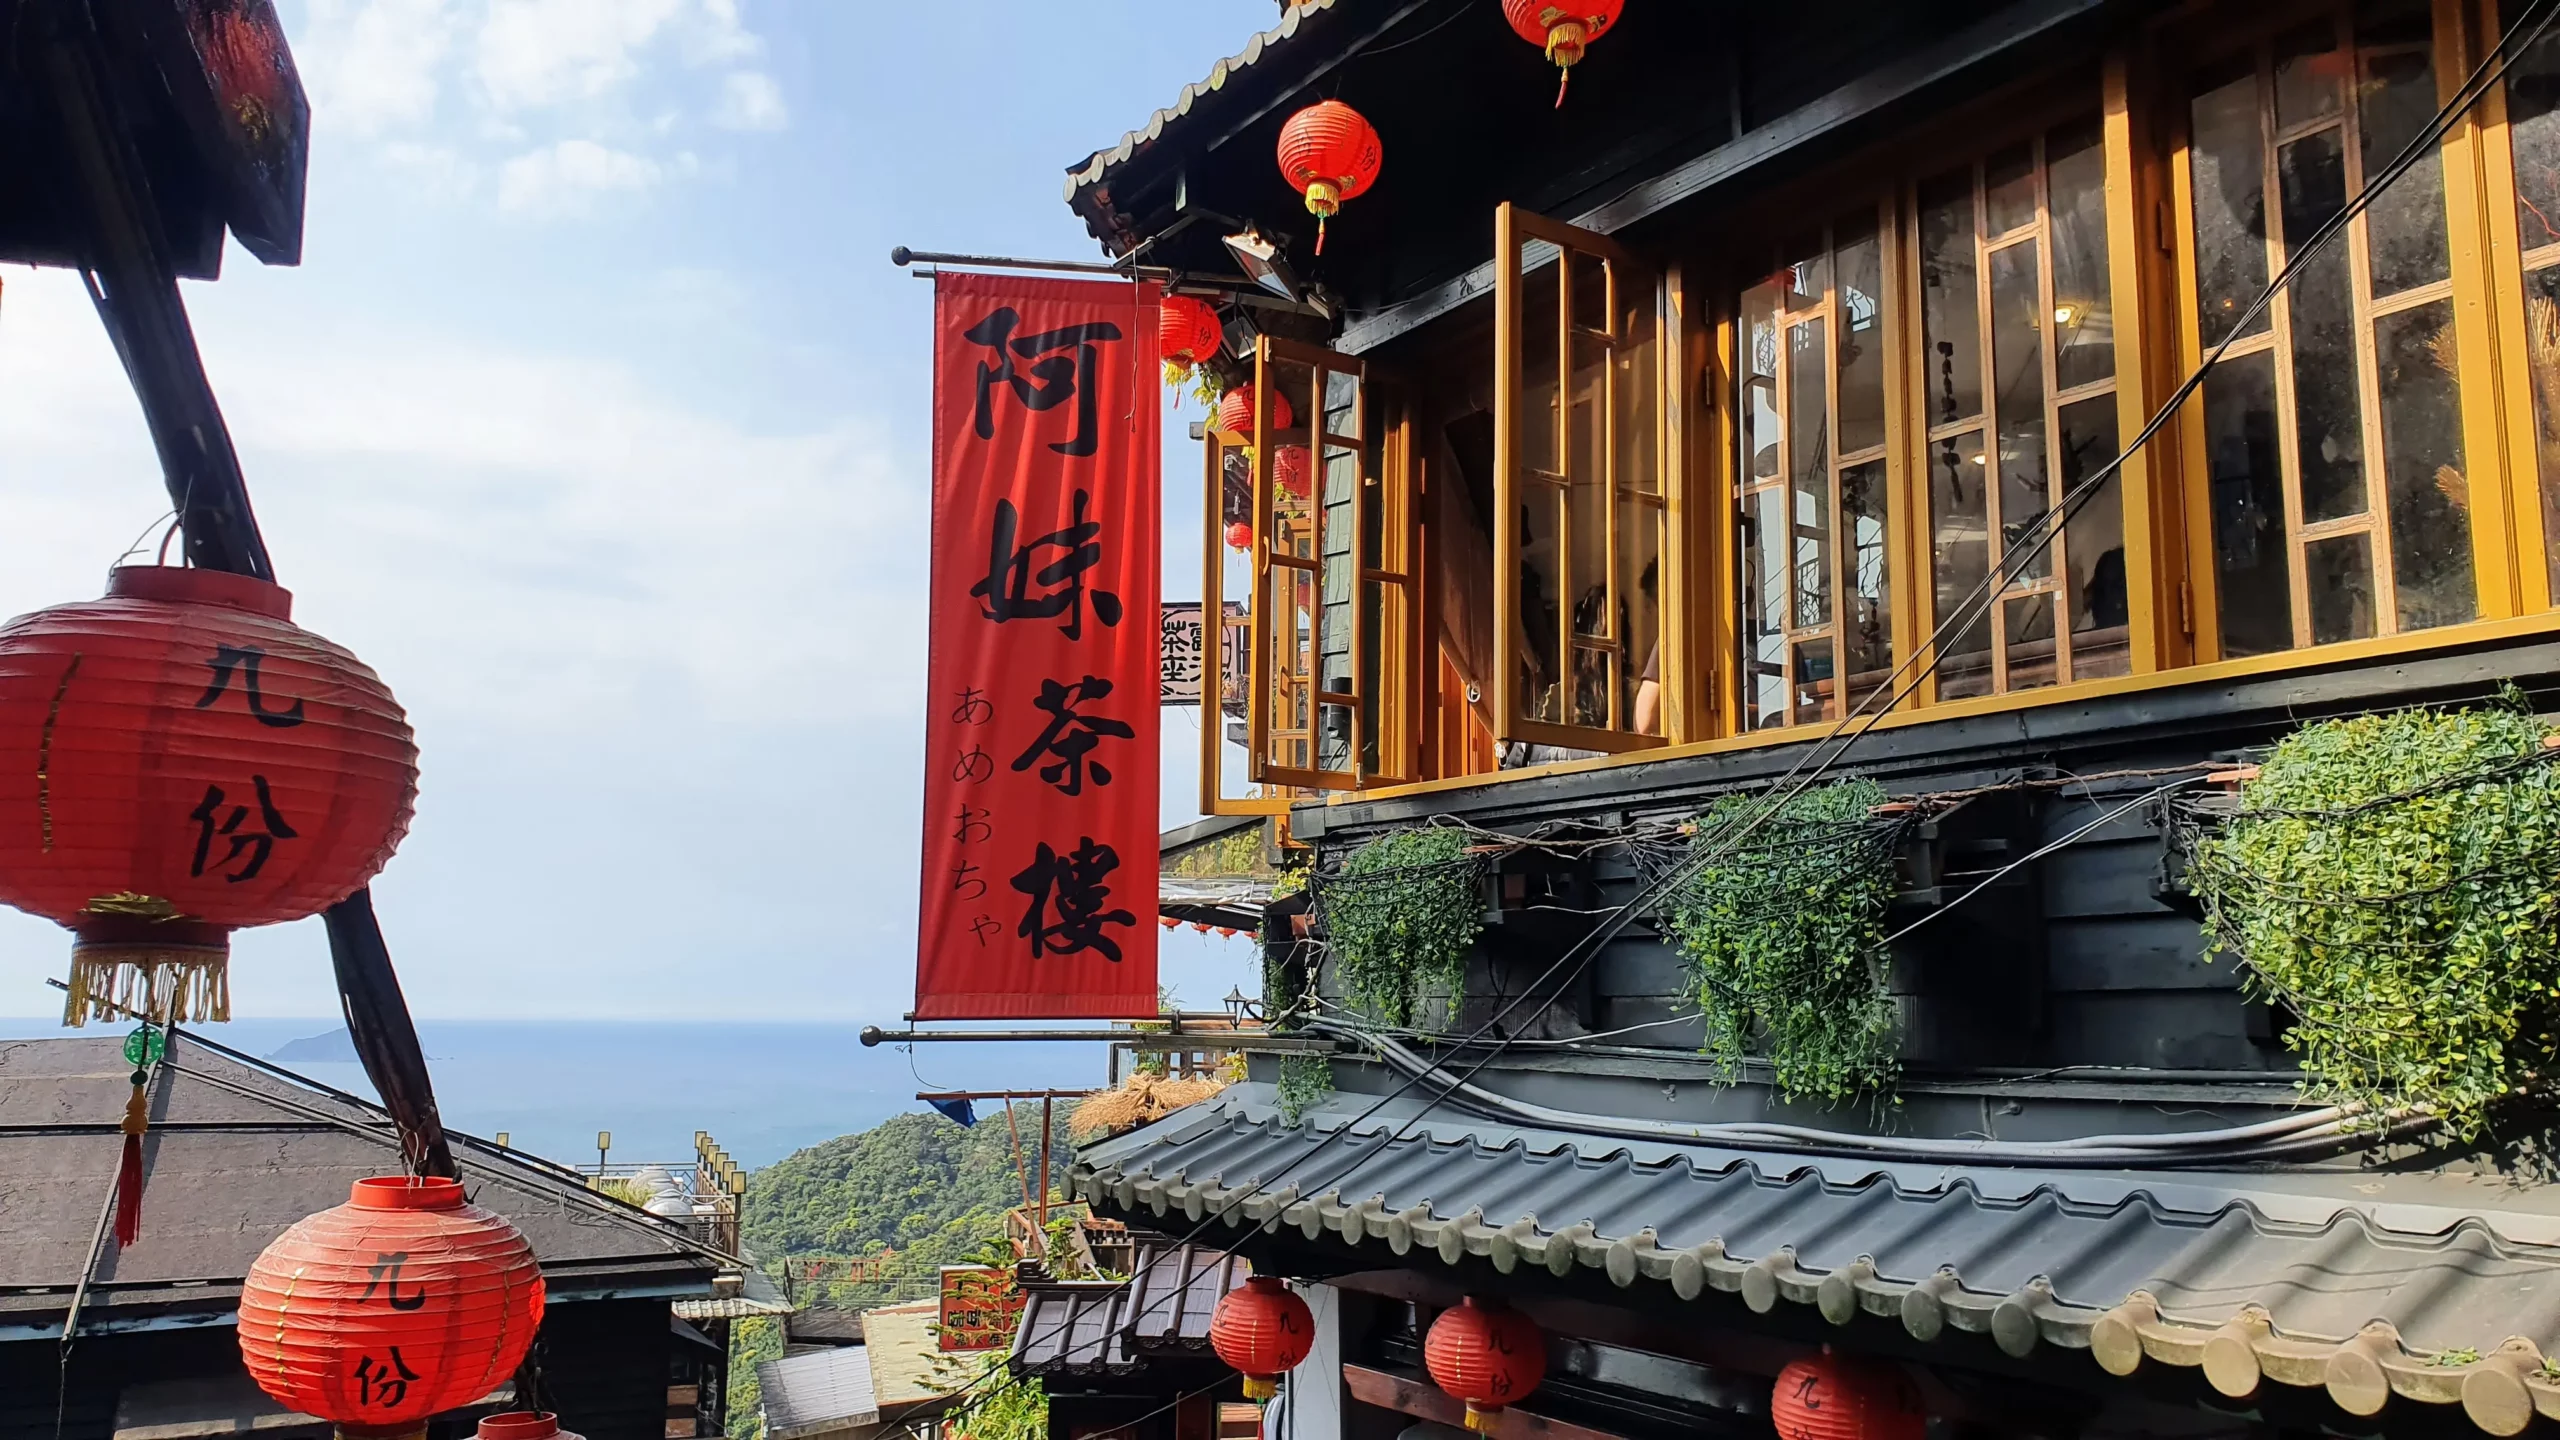 A-MEI Tea House, Jiufen Old Street, New Taipei City, Ruifang District